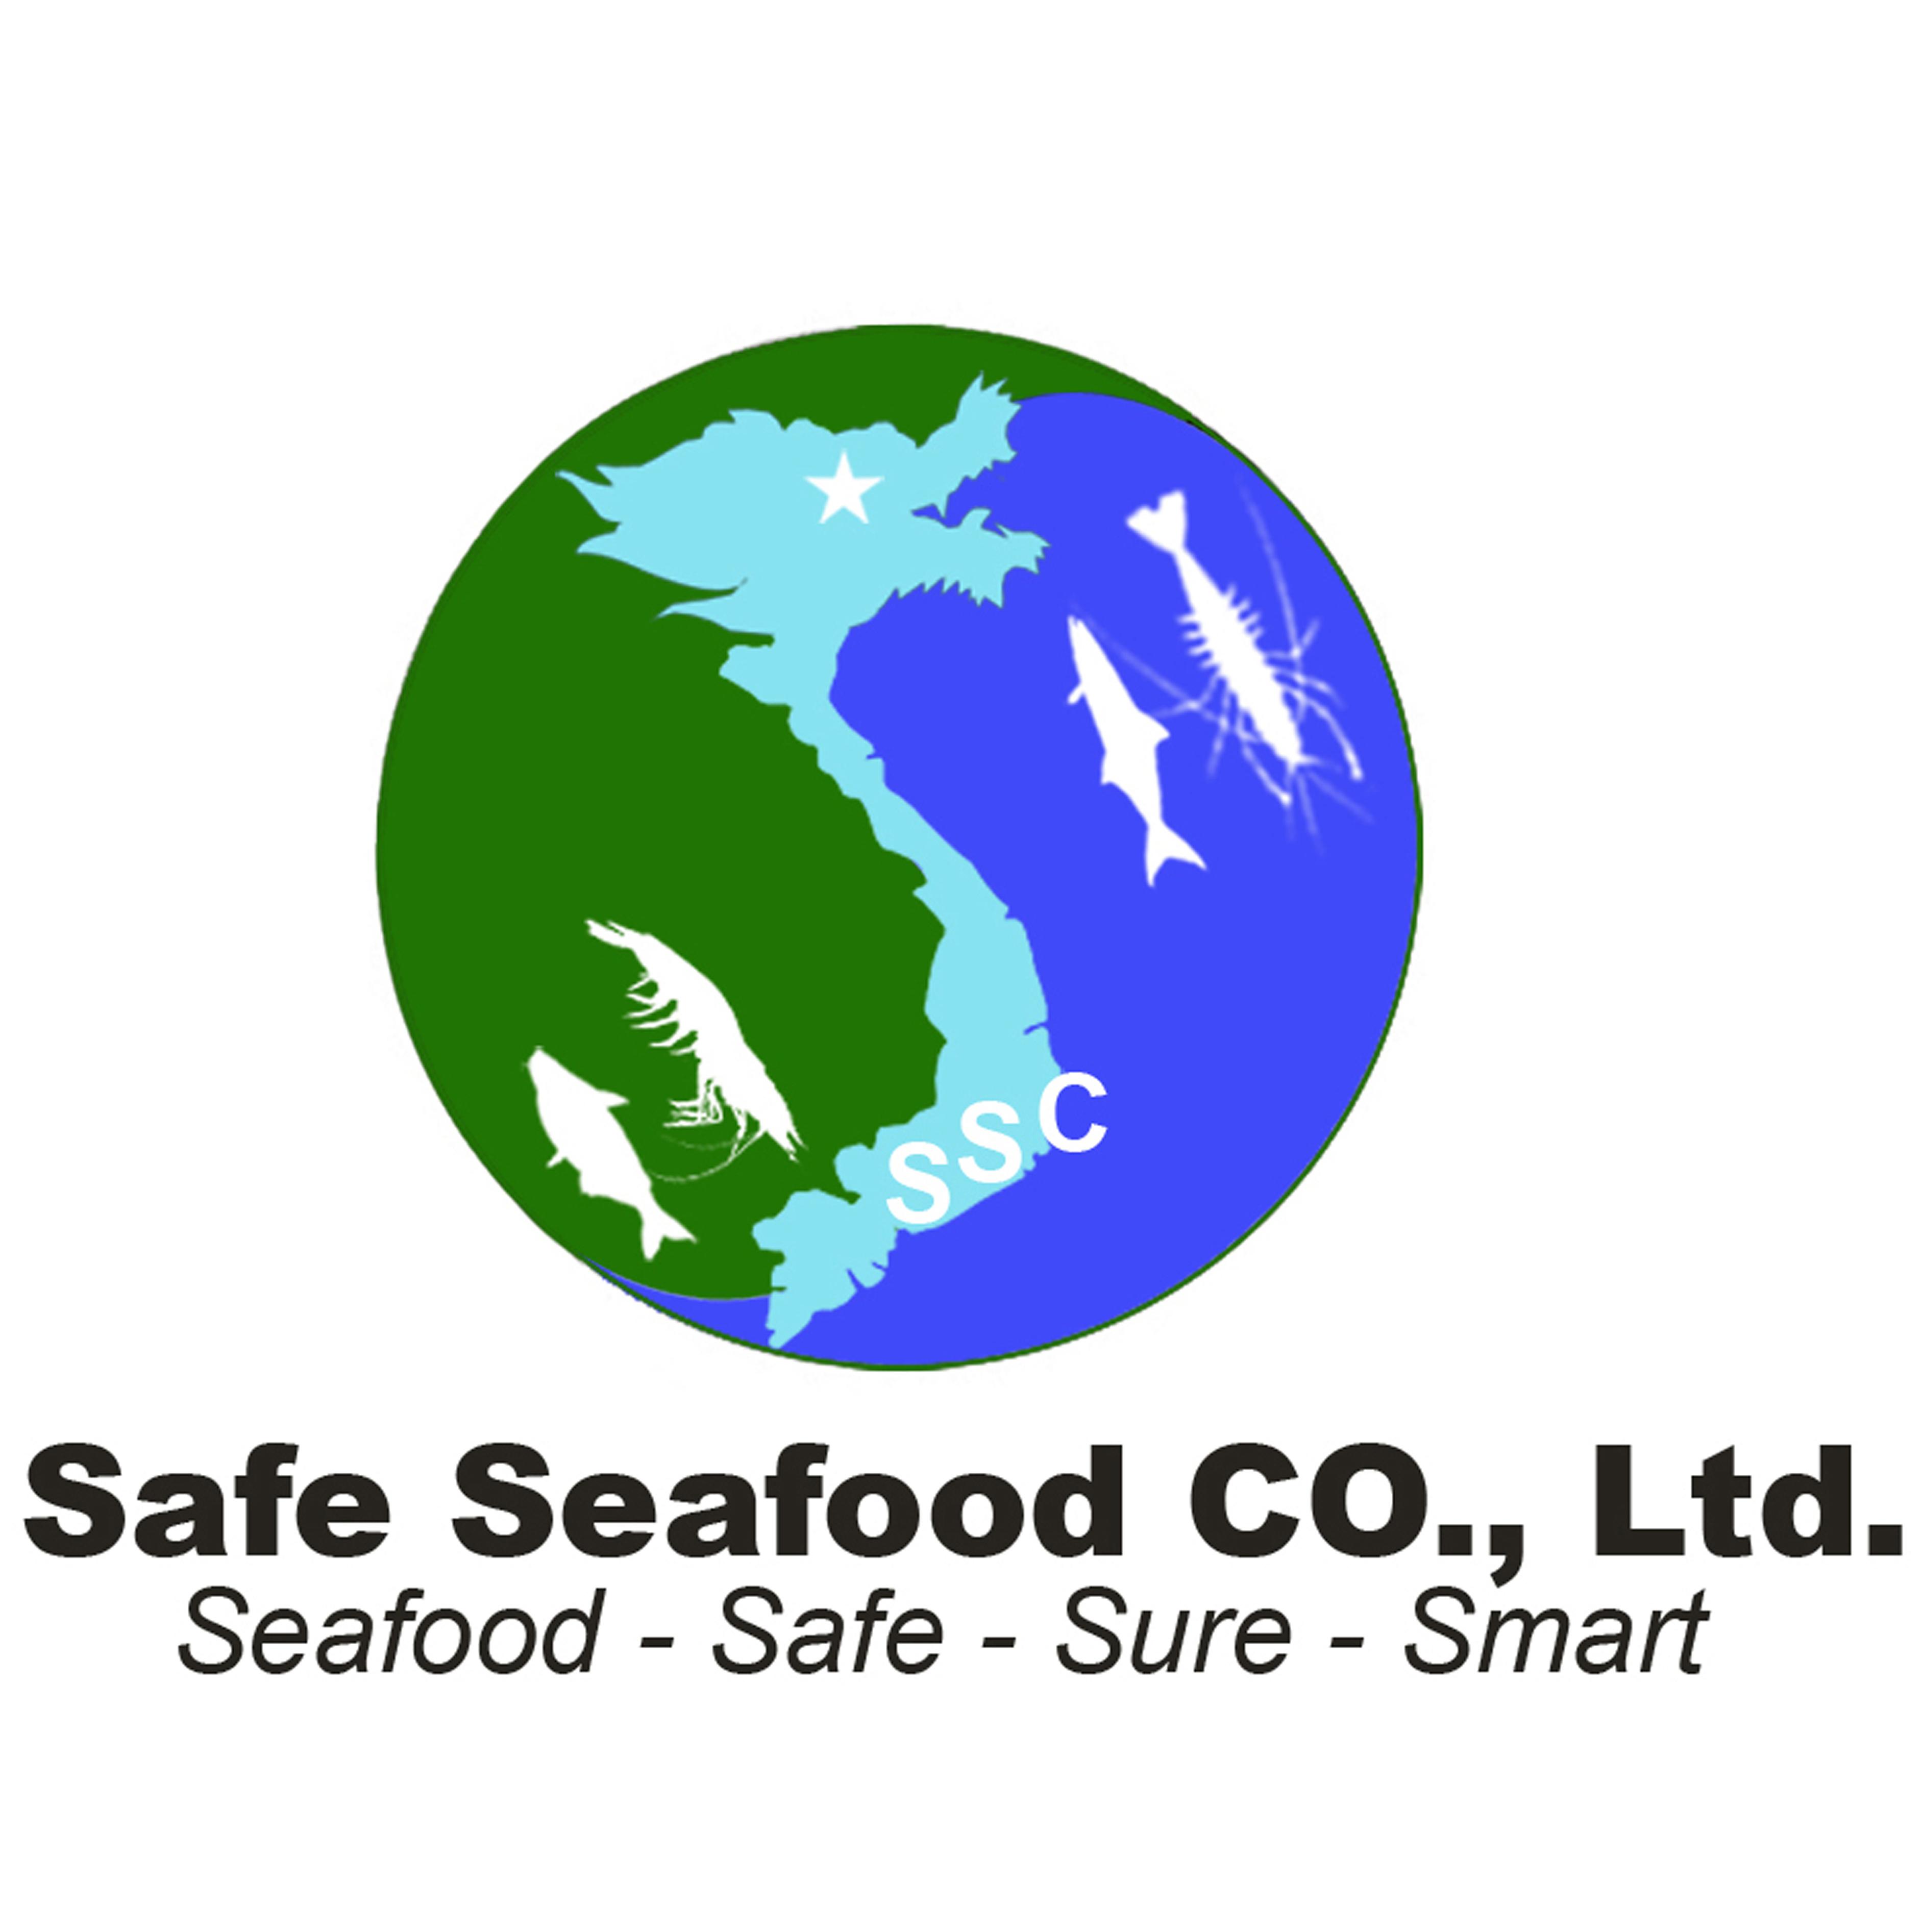 SAFE SEAFOOD AND CONSTRUCTION COMPANY LTD